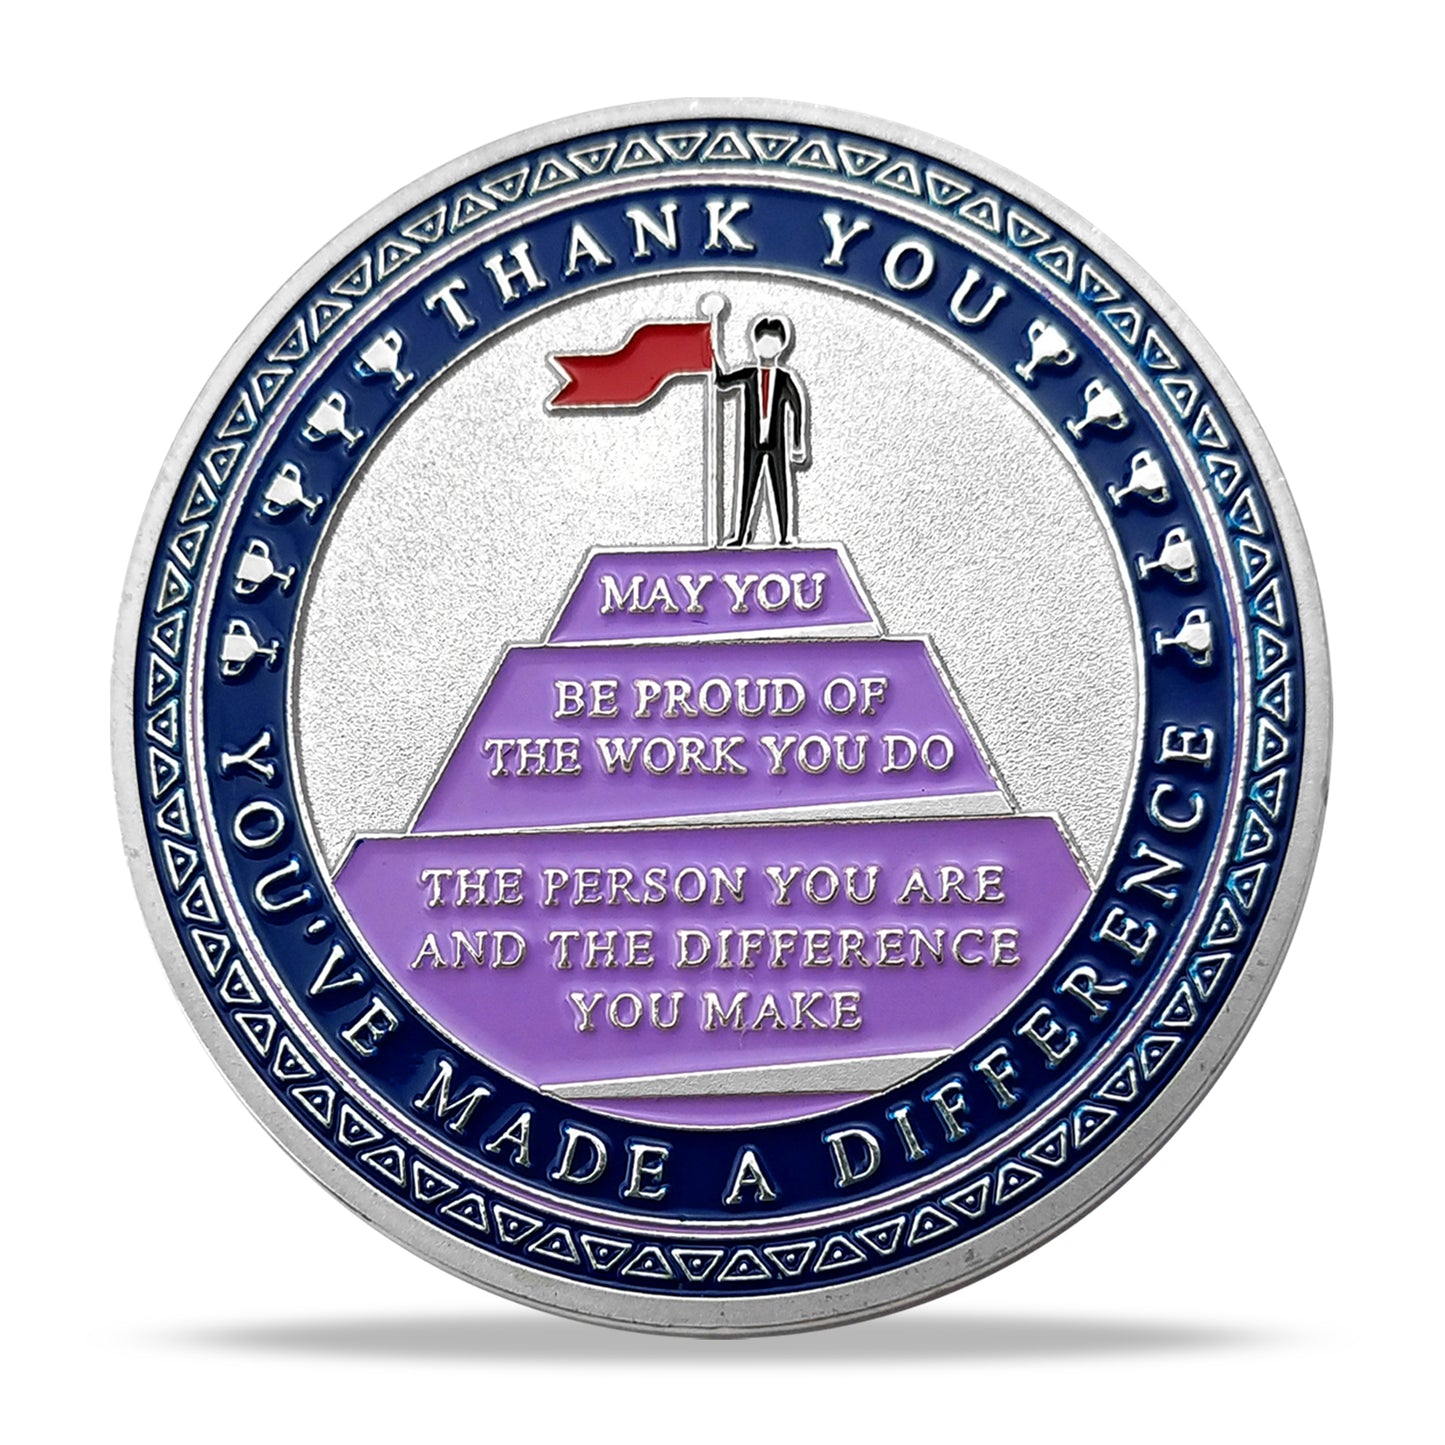 Encouragement Challenge Coin-employee Appreciation Gifts Inspirational Thank You Coin for Students and Cowokers-the Red Arrow Breaks the Wall